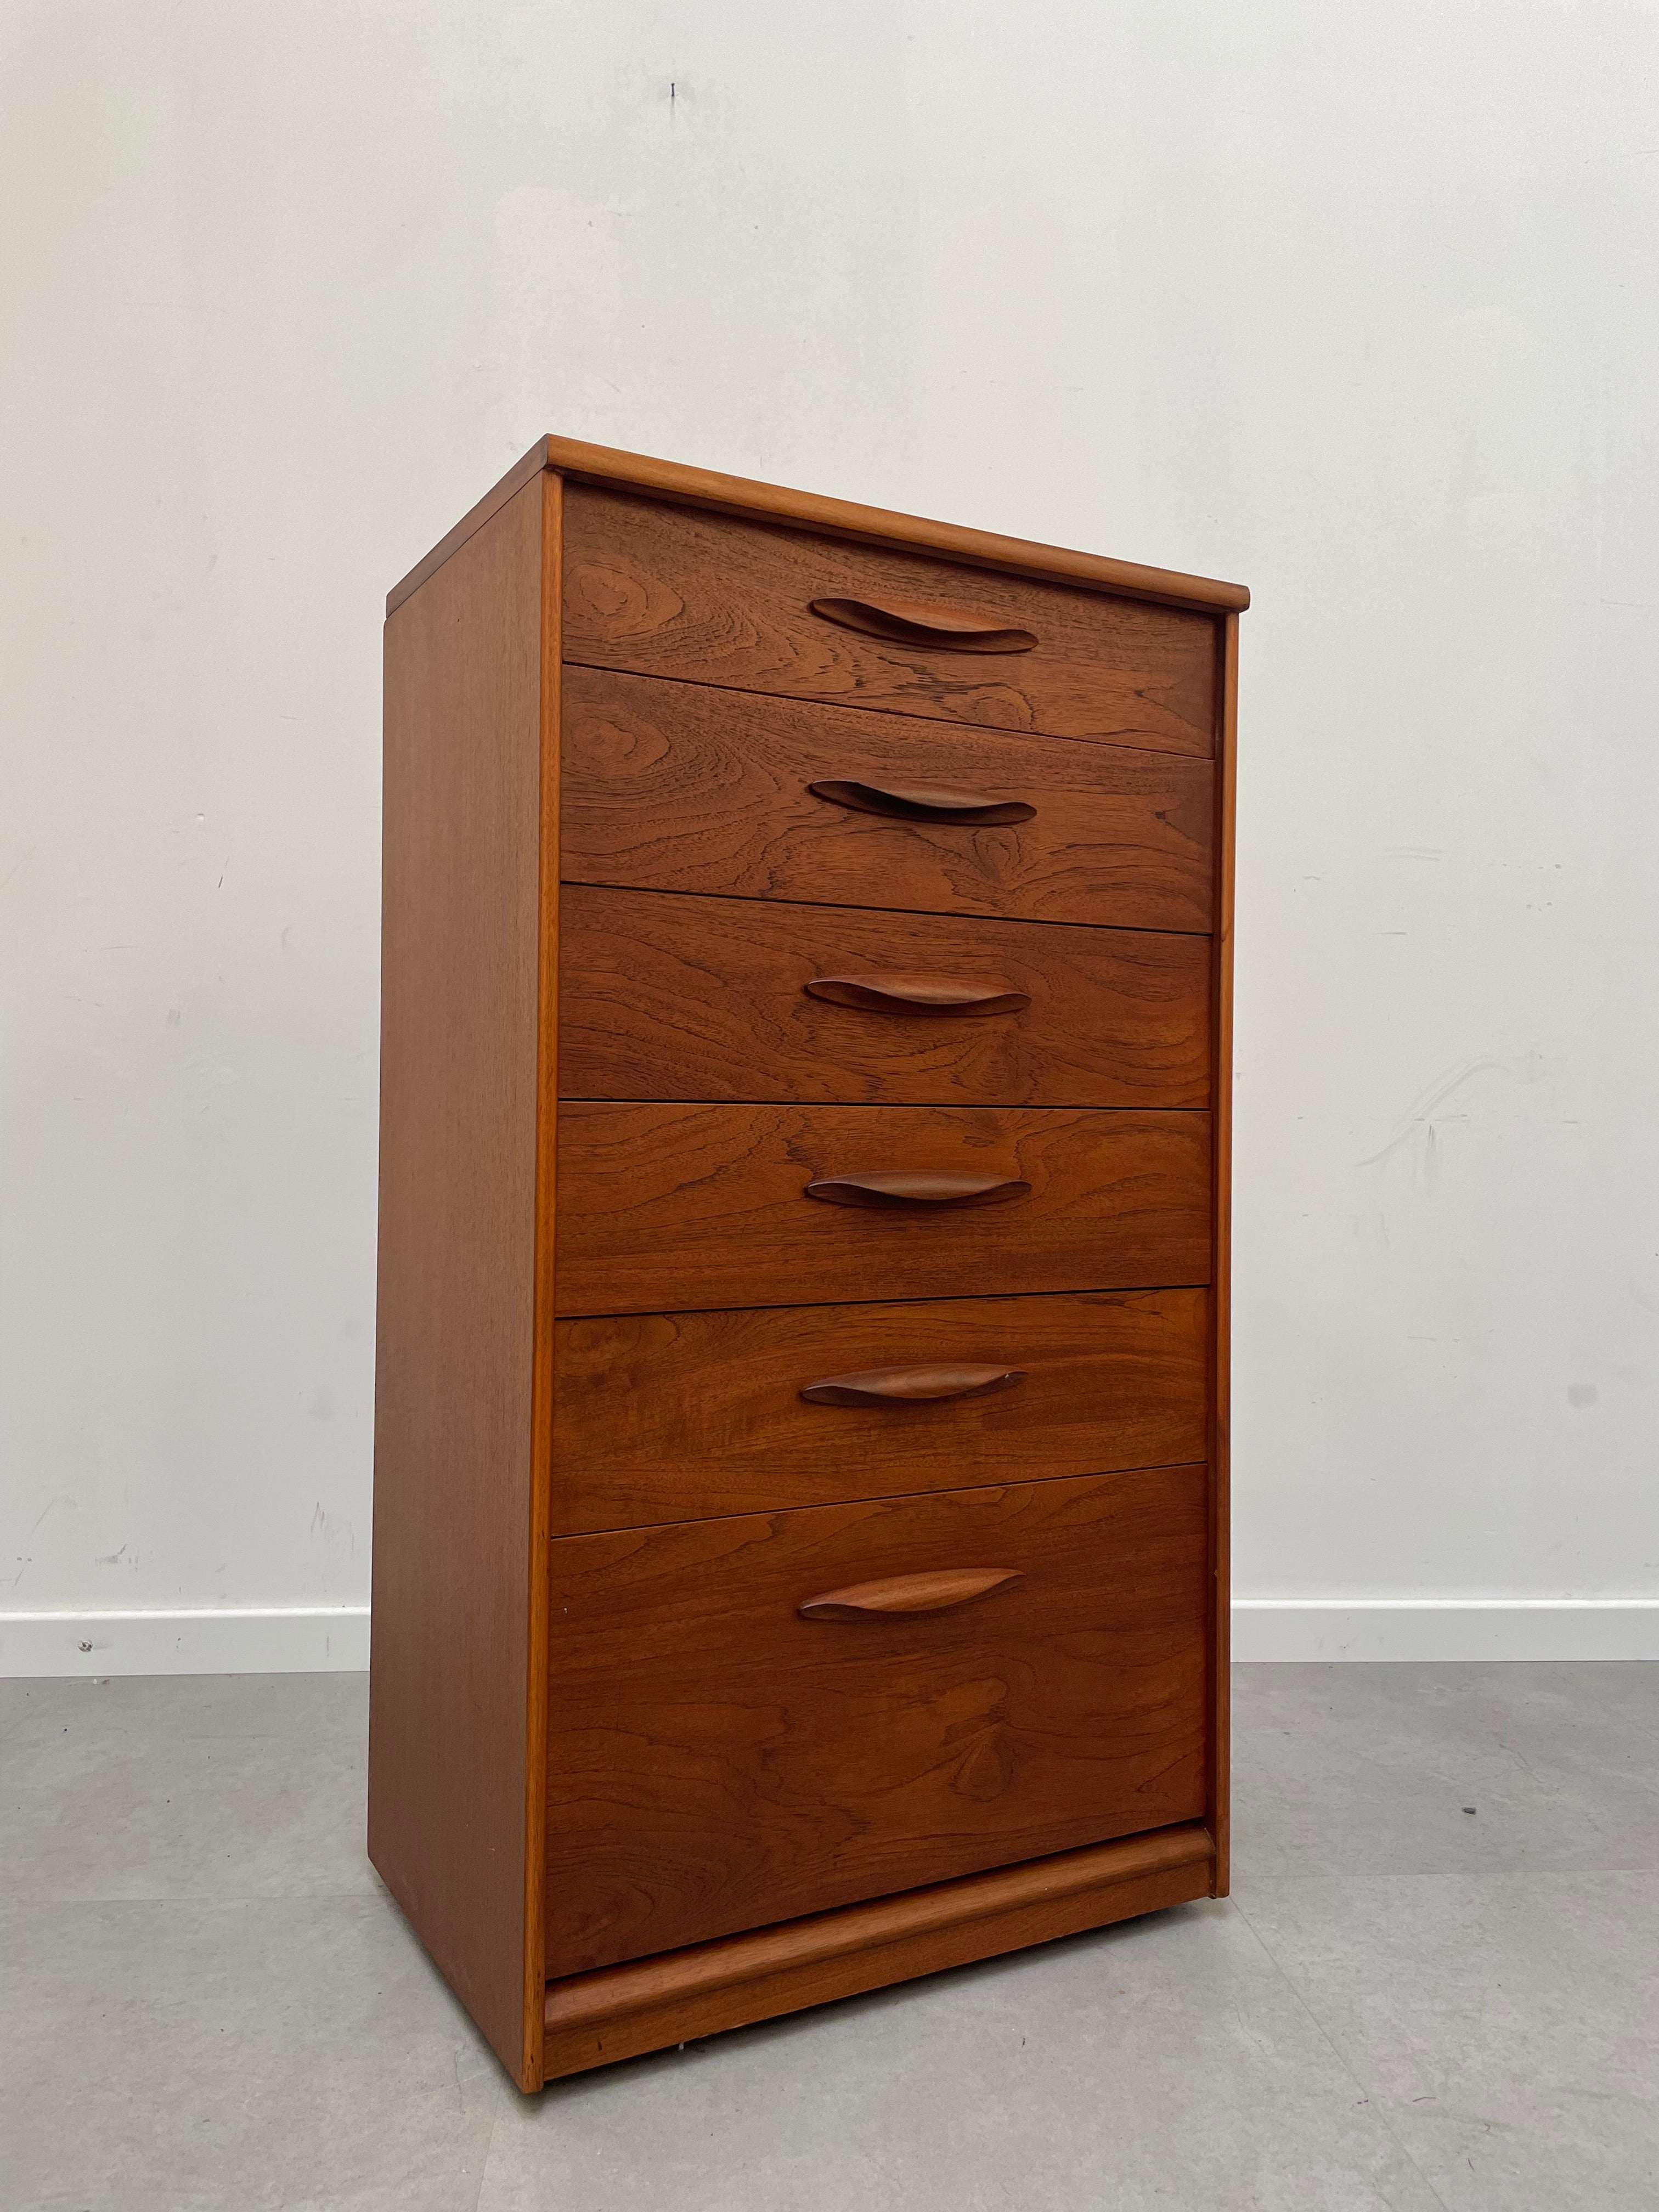 Austinsuite chest of drawers (6)